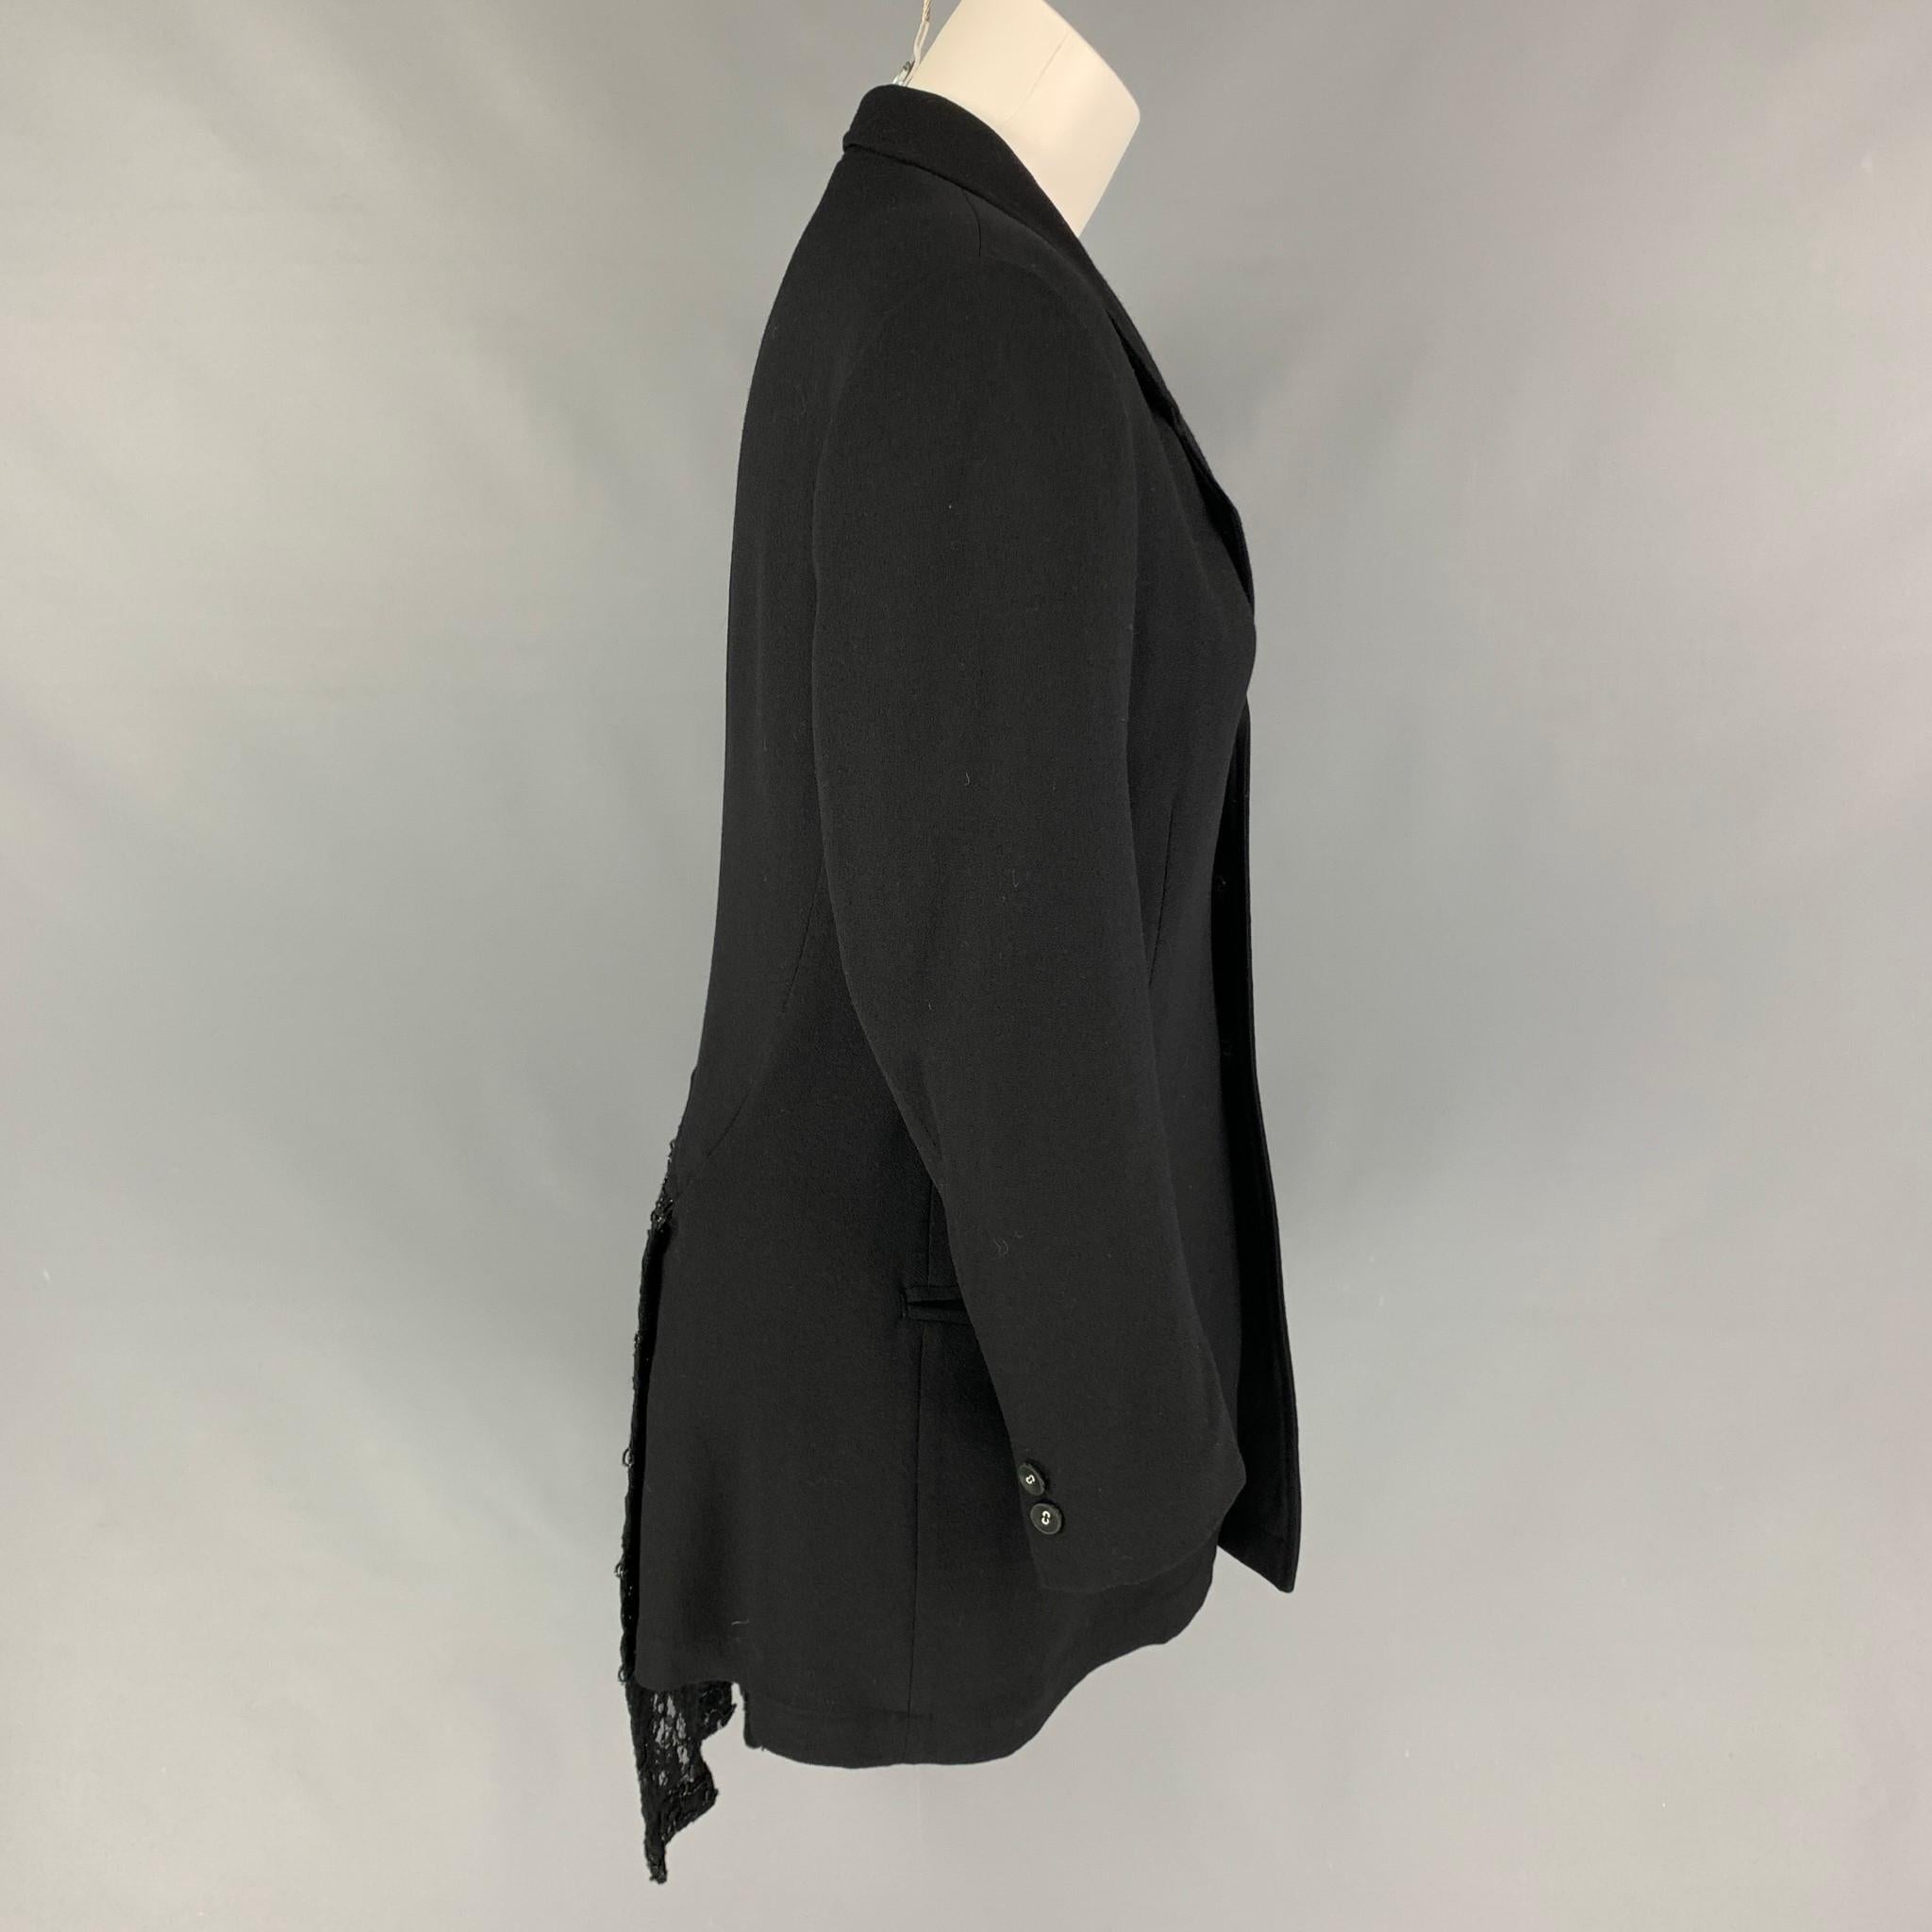 REI KAWAKUBO jacket comes in a black wool with a half liner featuring a notch lapel, ruffled lace trim, slit pocket detail, and a buttoned closure. Made in Japan. 

Very Good Pre-Owned Condition.
Marked: M

Measurements:

Shoulder: 16 in.
Bust: 38